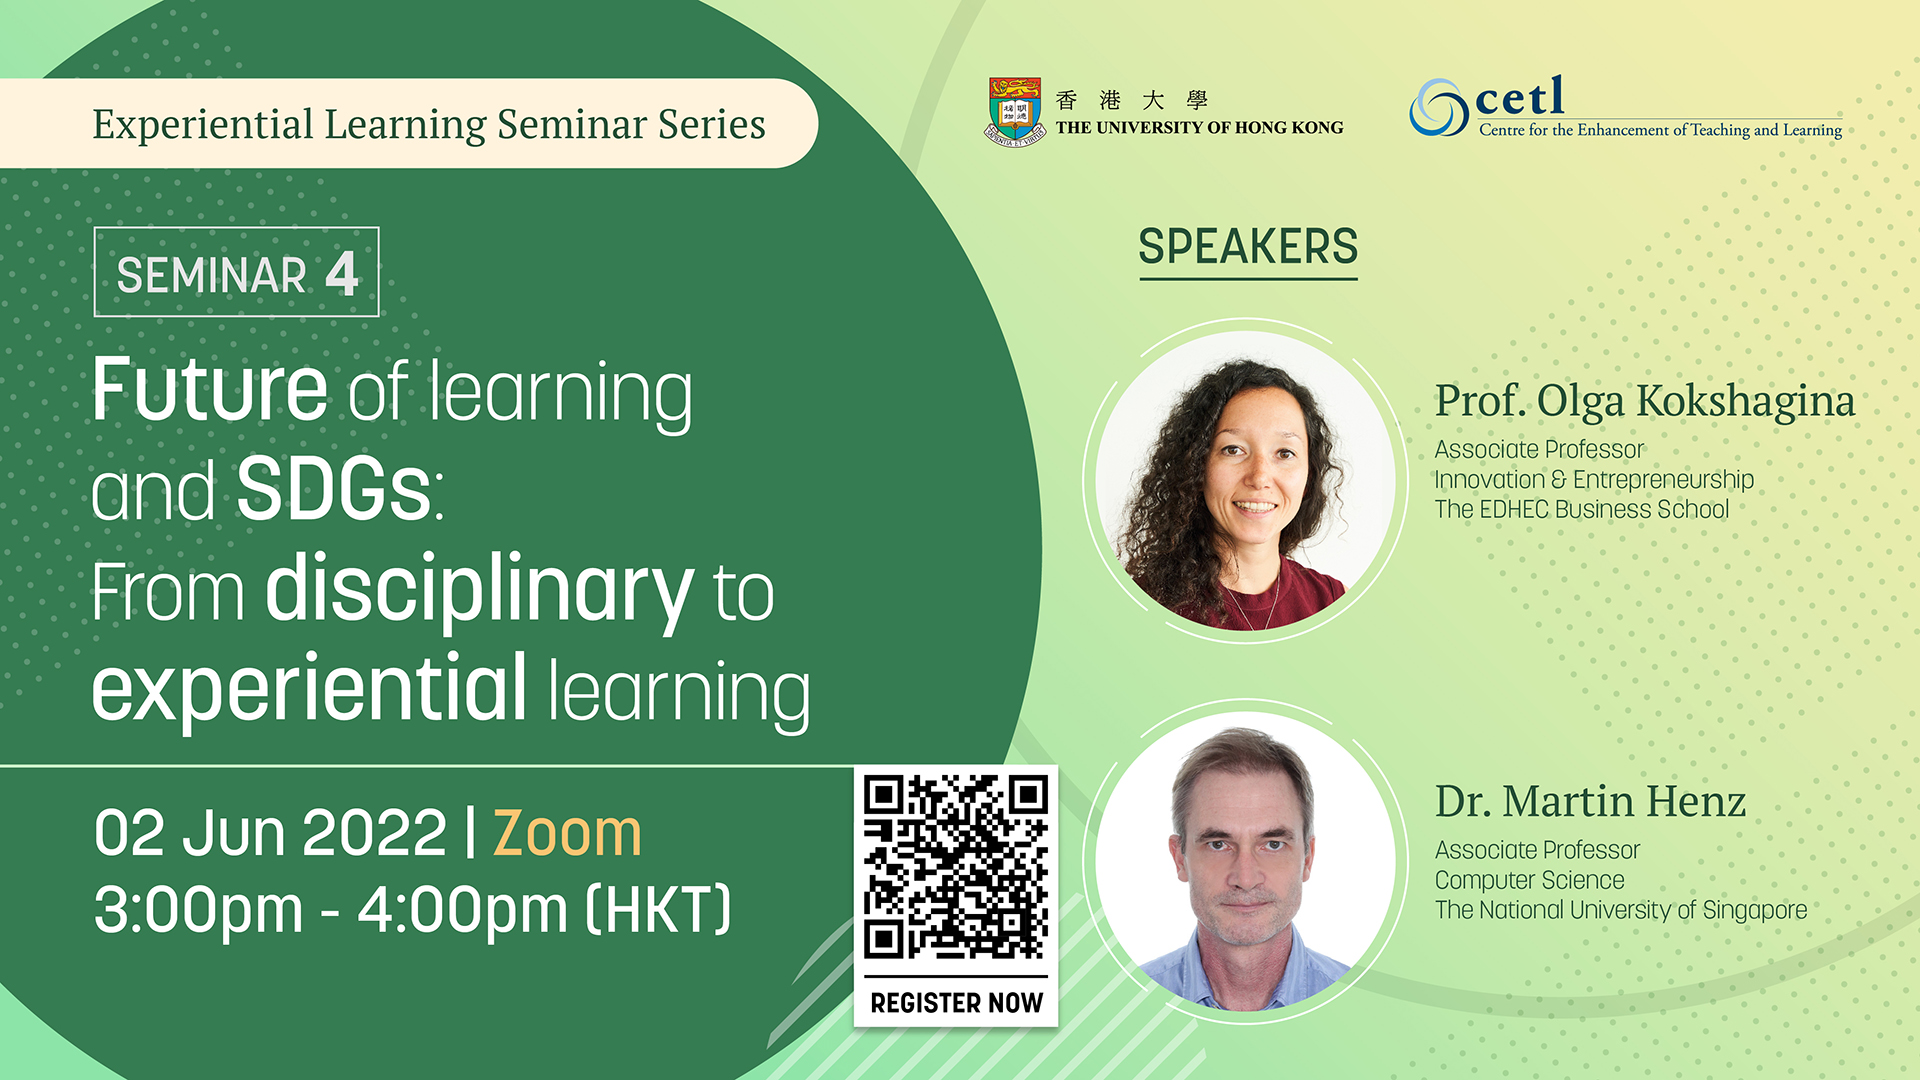 Seminar 4 - Future of learning and SDGs: From disciplinary to experiential learning